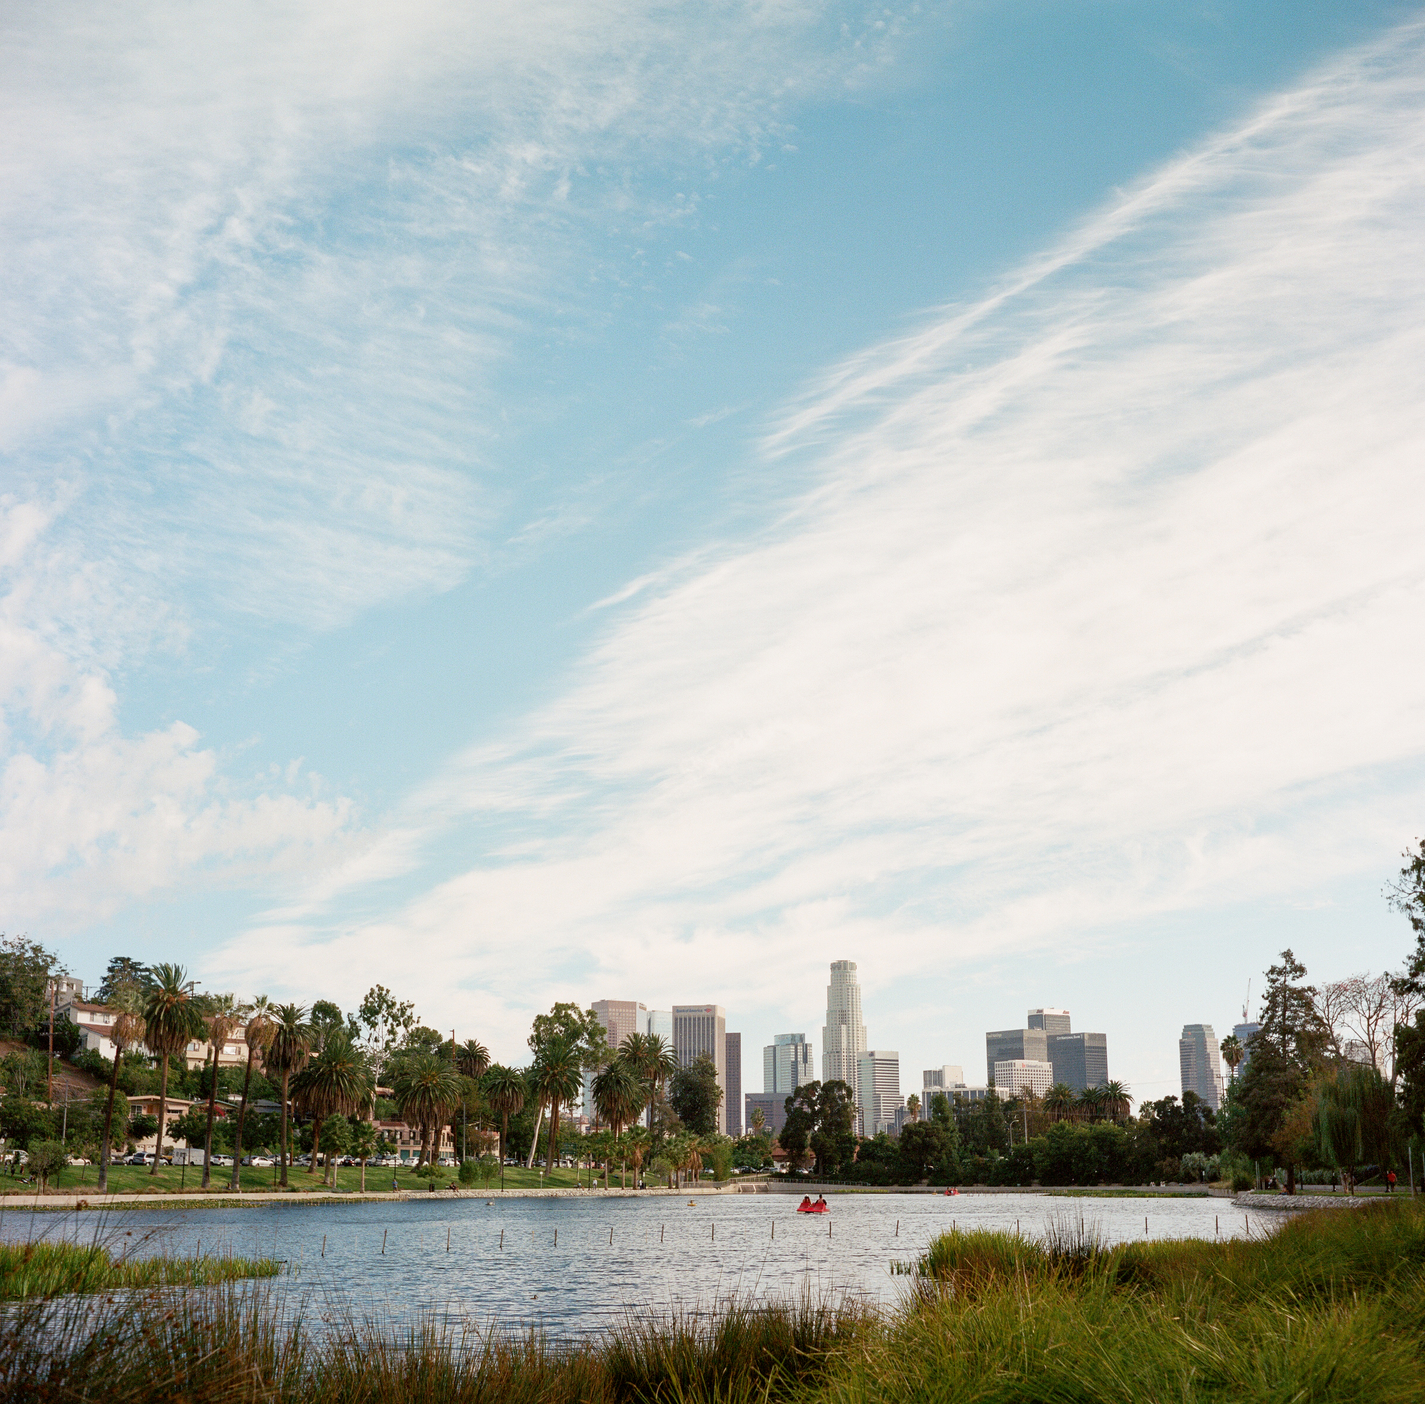 A photo of a pond in Echo park during the daytime with the LA skyline in the background